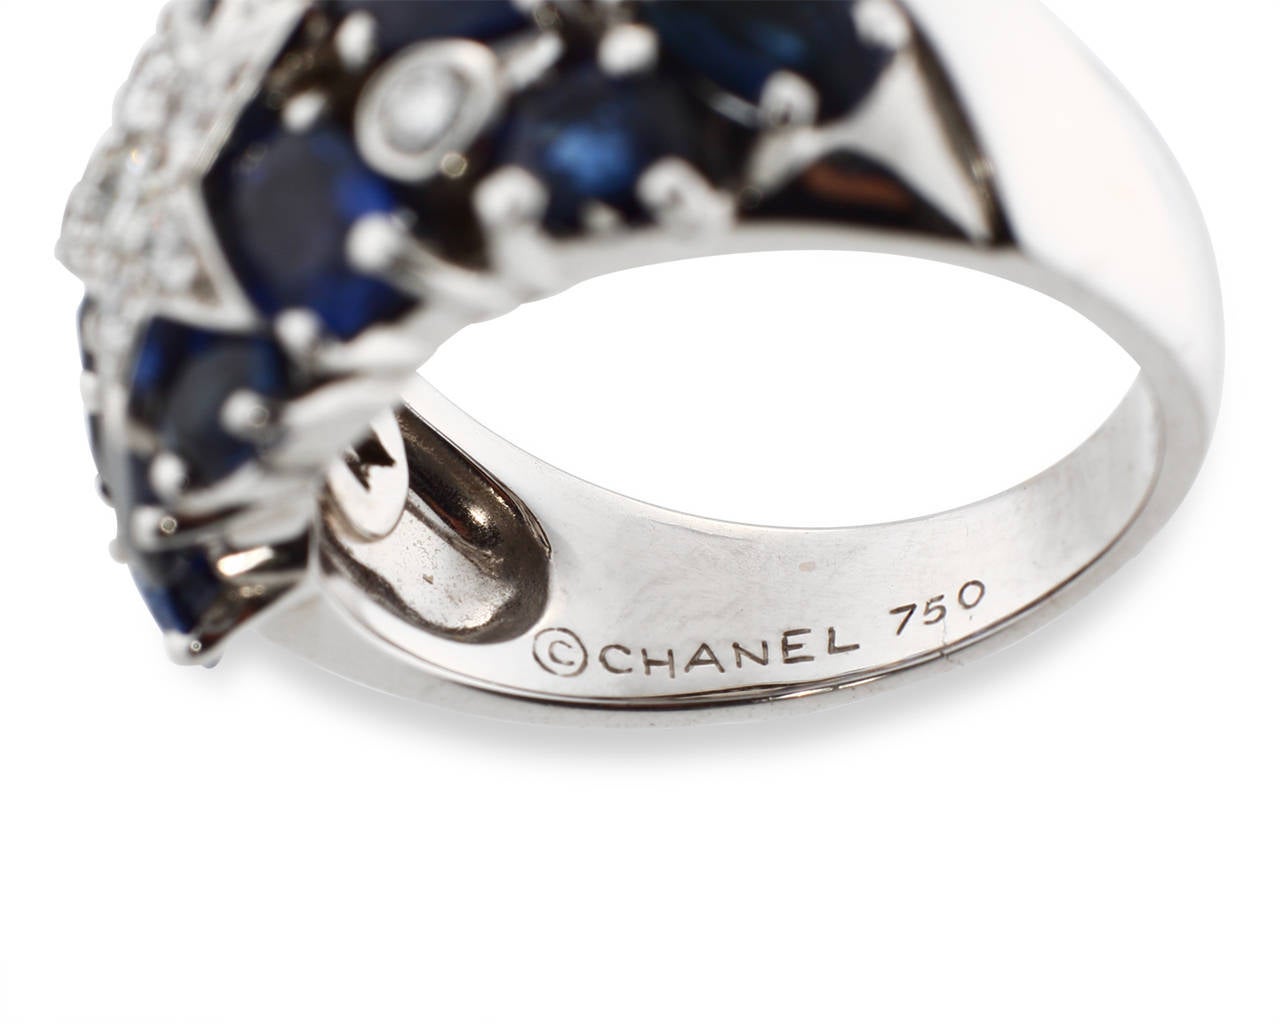 Adorn this sensational Chanel ring from the Comete Collection and we guarantee all eyes will be on you! This ring comes in a gorgeous star comet shape and feature an array of sapphires and diamonds. It will serve as the perfect accessory for any